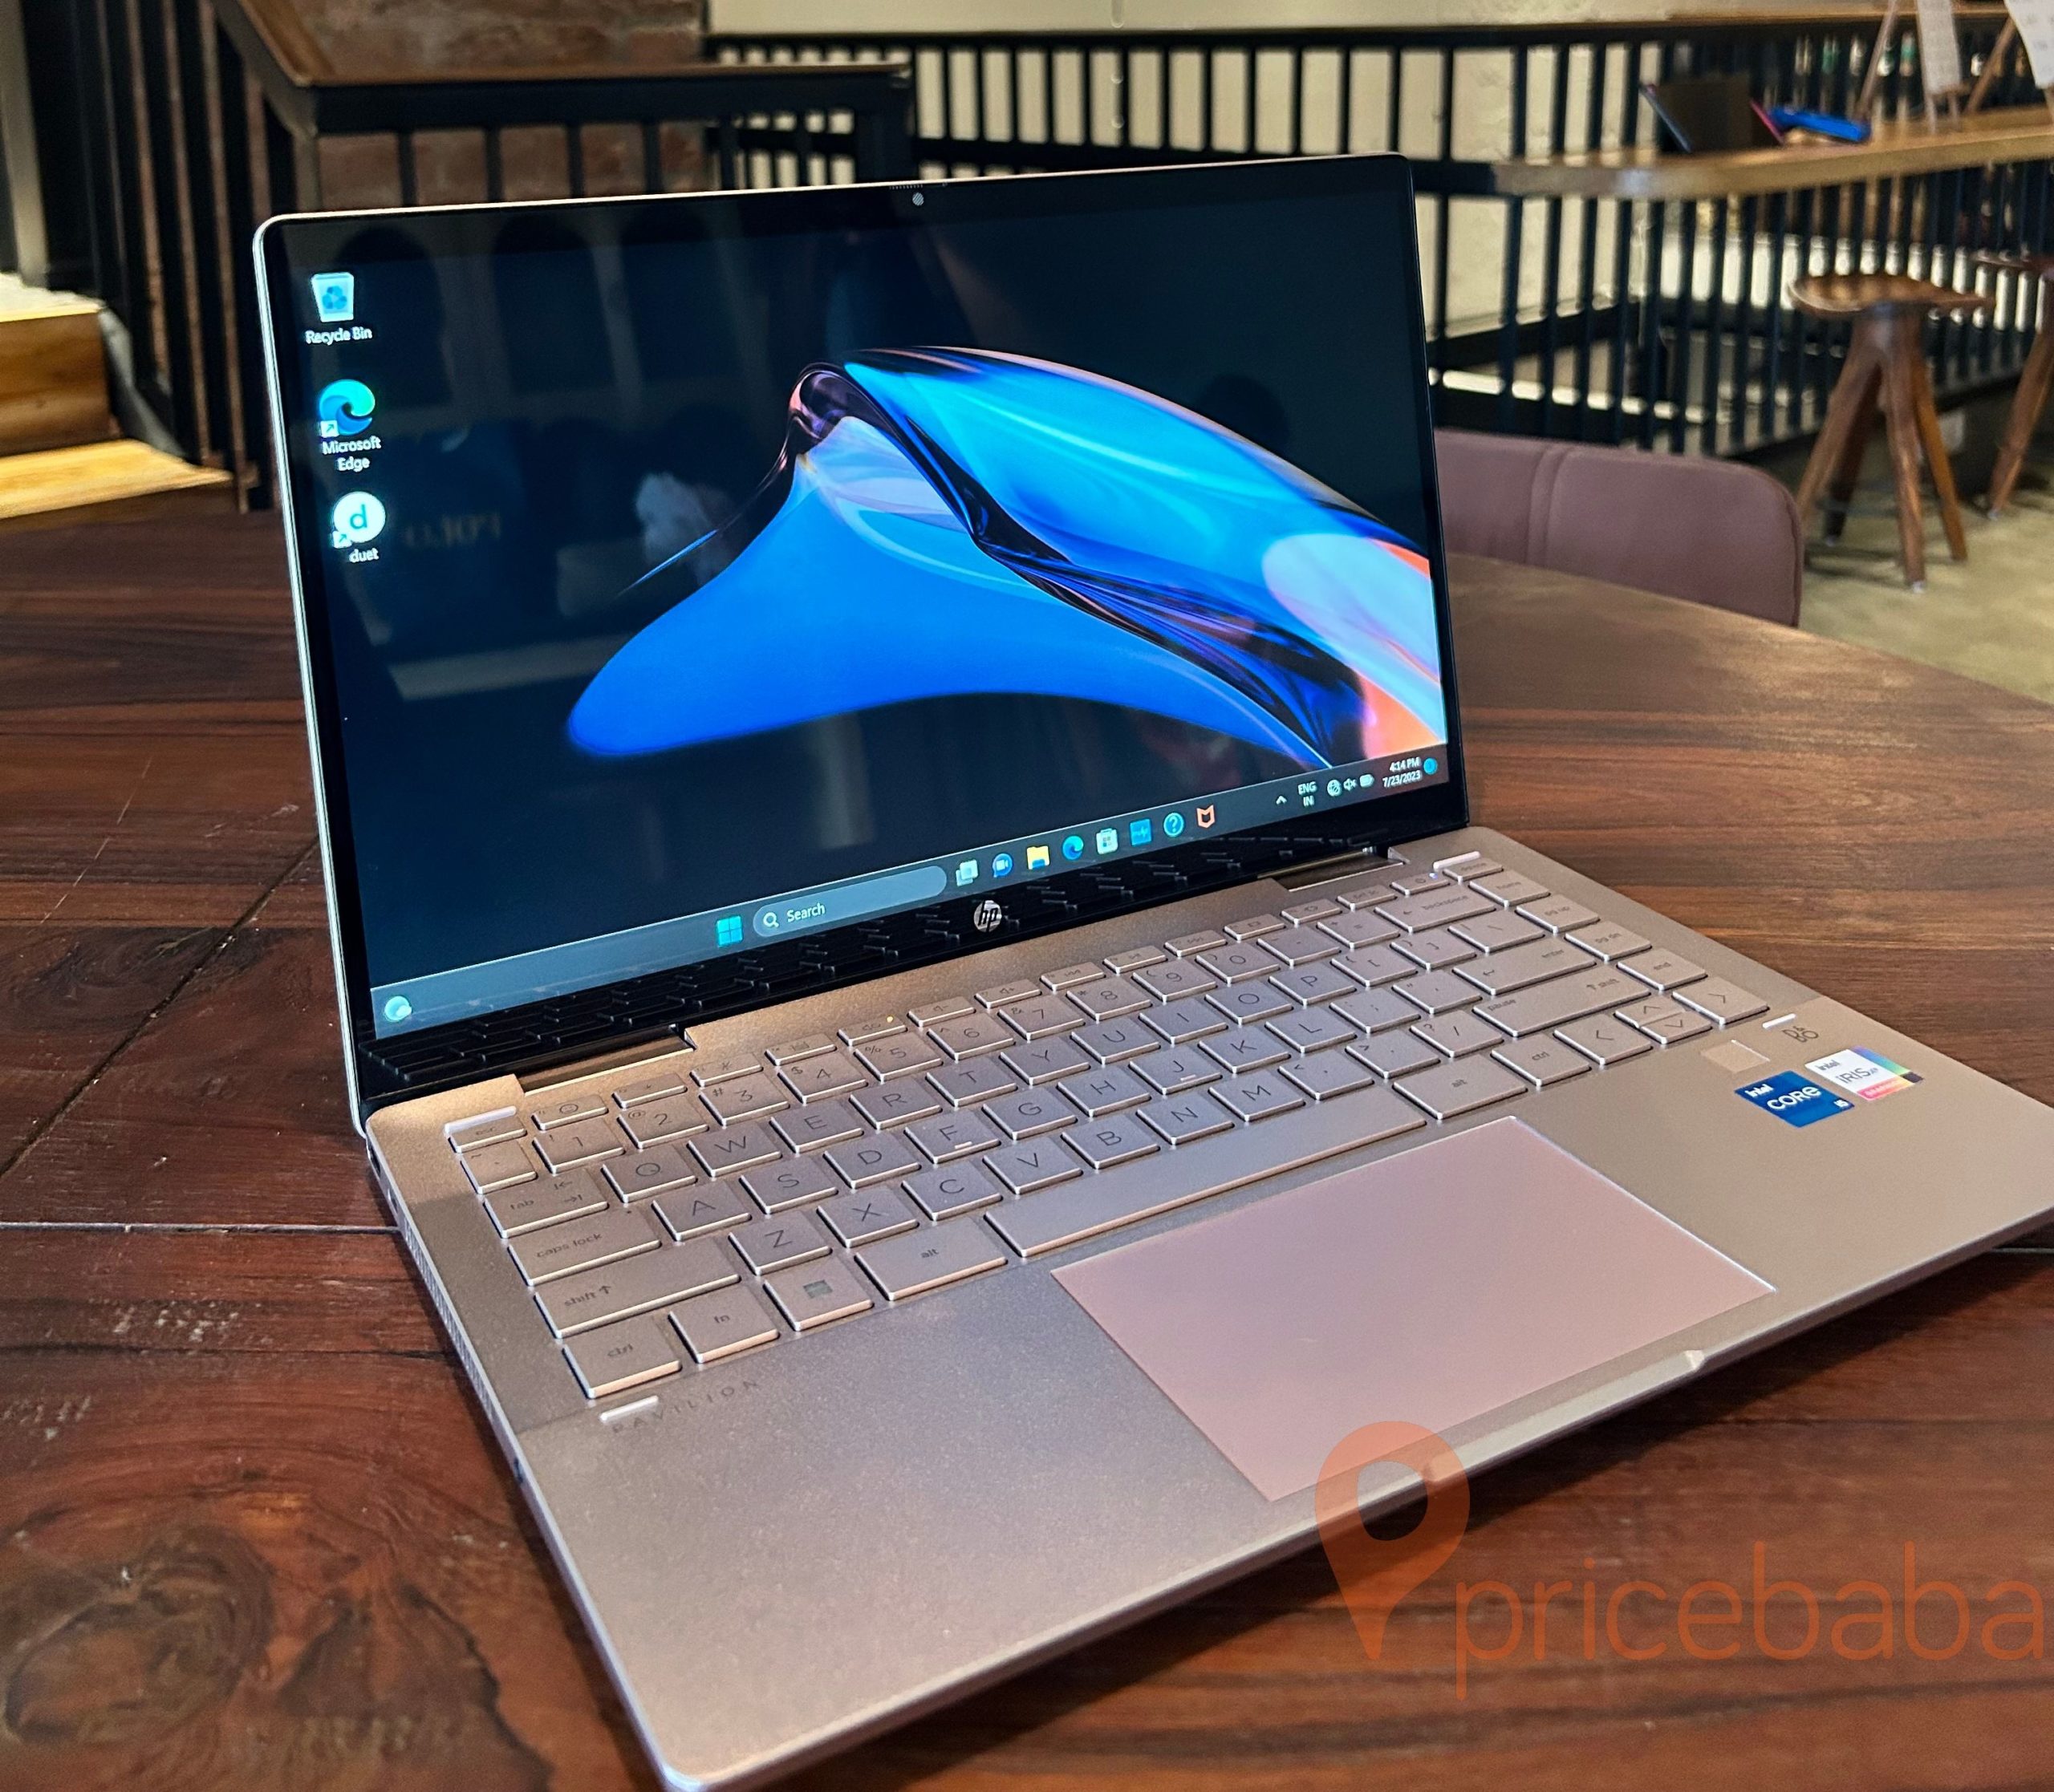 HP Pavilion x360 2-in-1 14 Laptop Review